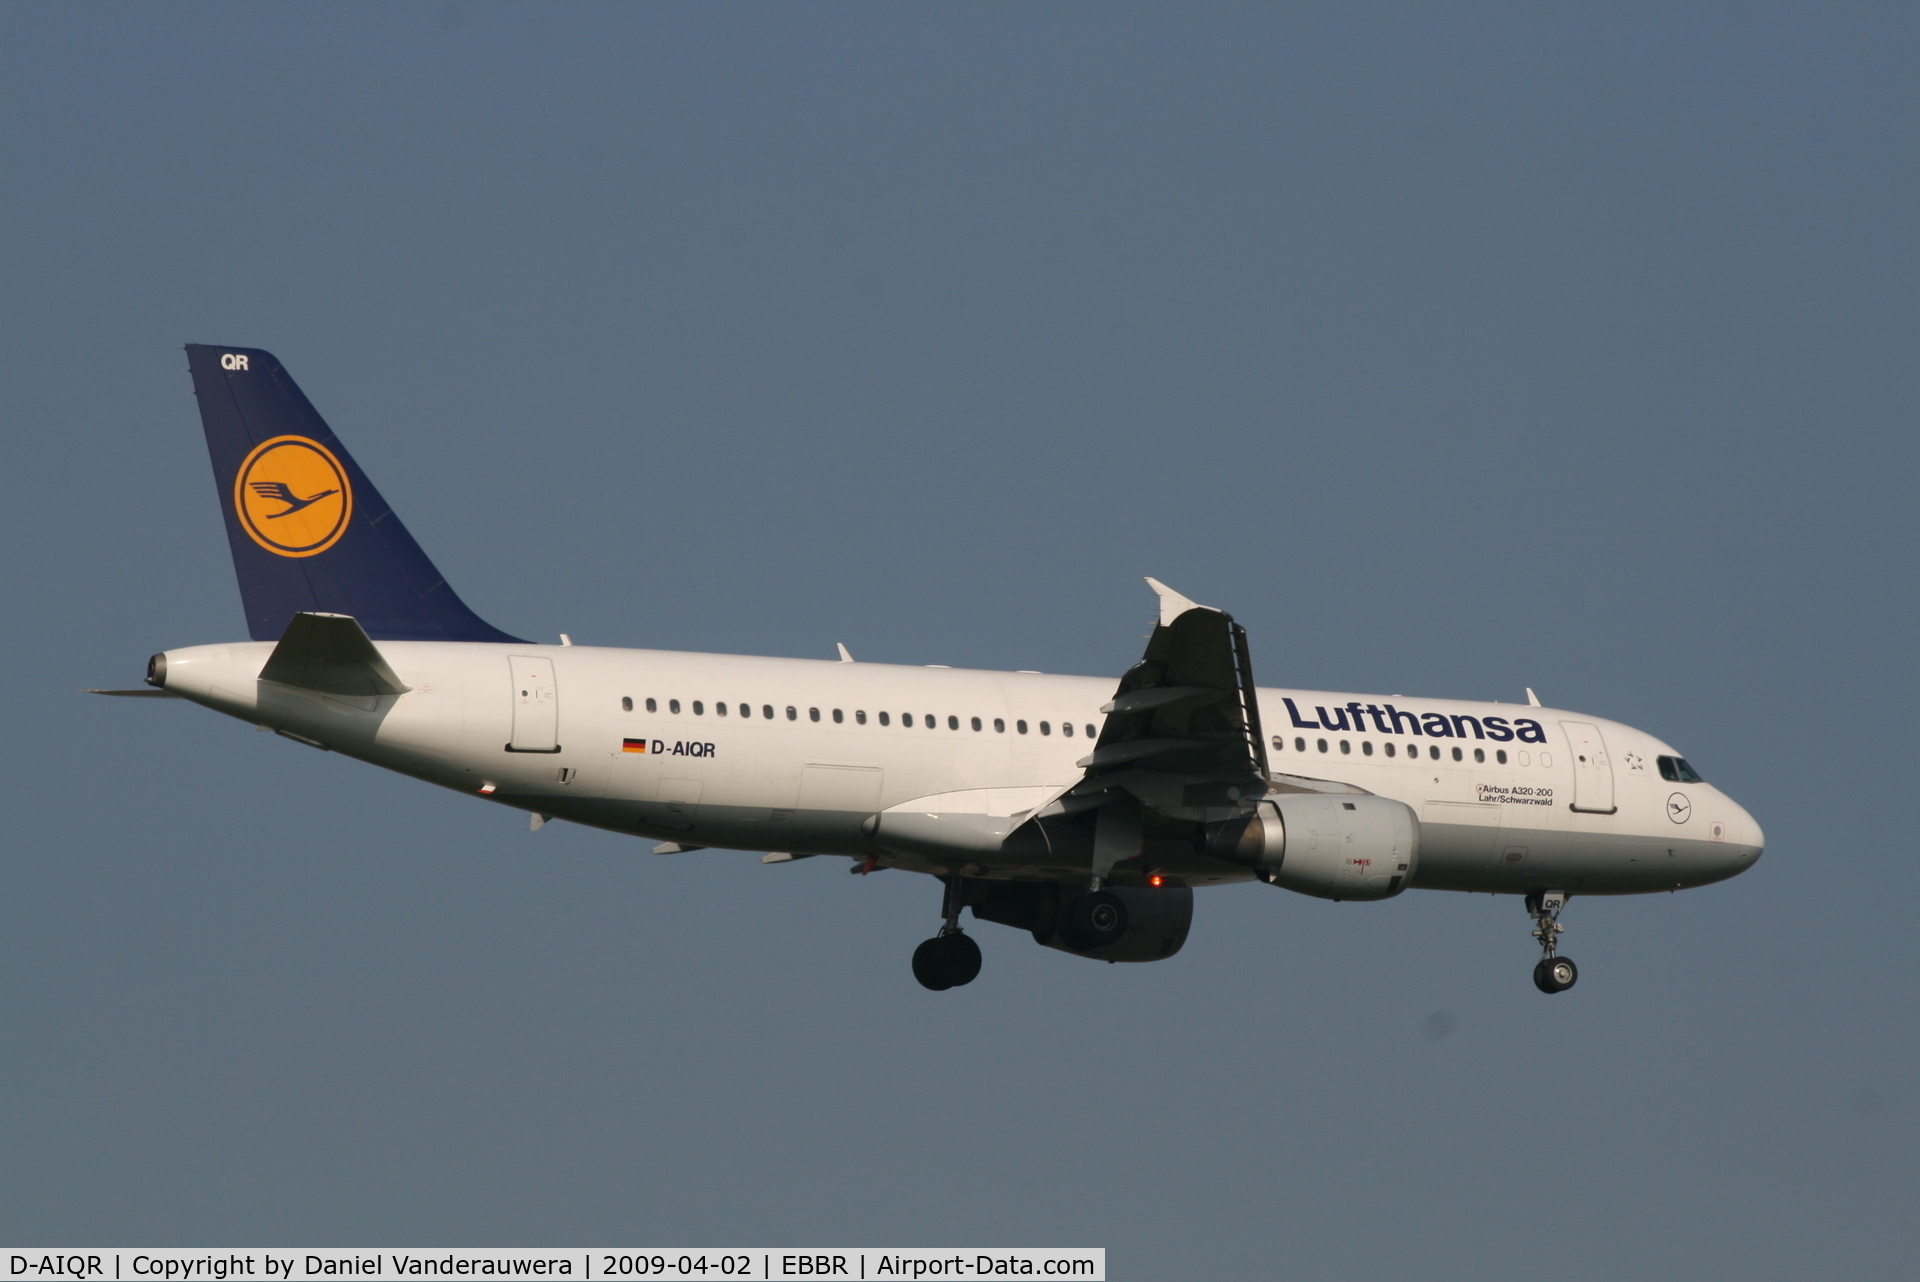 D-AIQR, 1992 Airbus A320-211 C/N 382, Flight LH4572 is descending to RWY 02